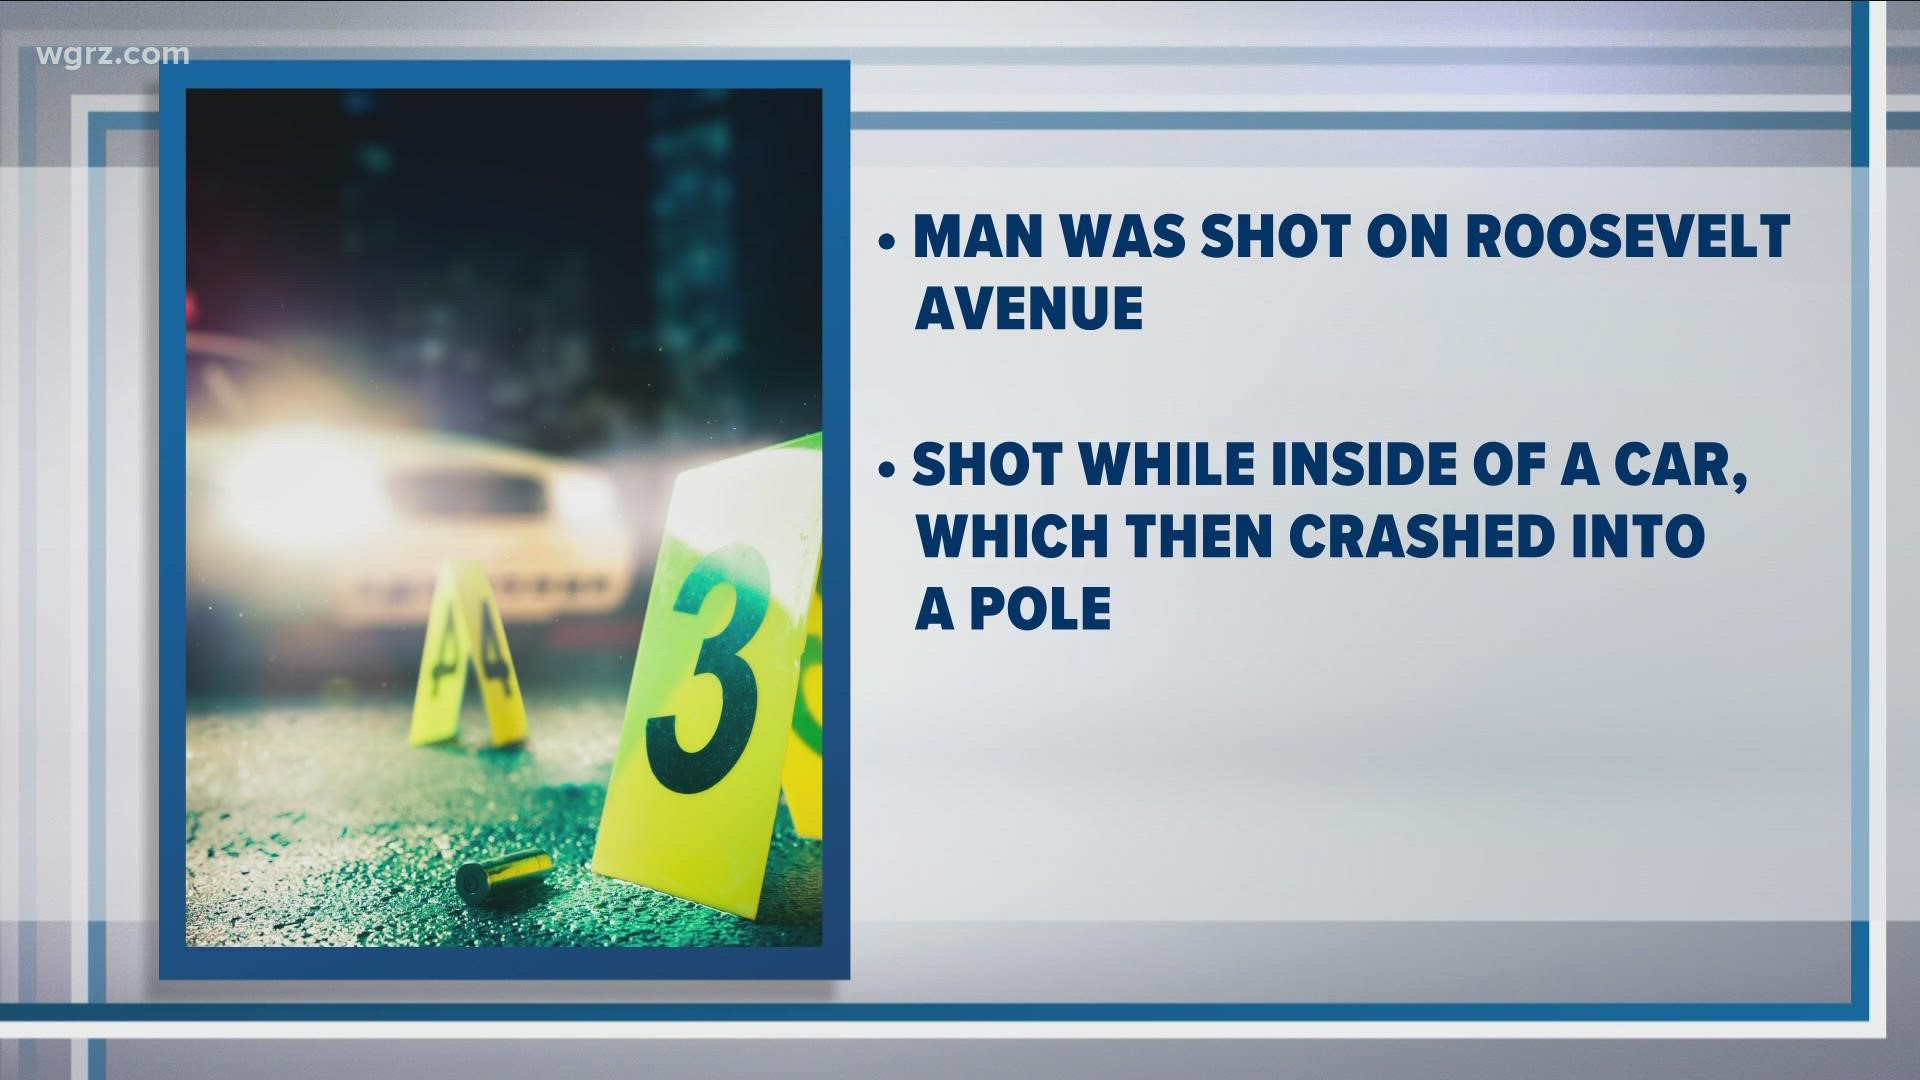 Police say a man was shot on Roosevelt Ave Saturday night inside of a car then crashed into a pole.